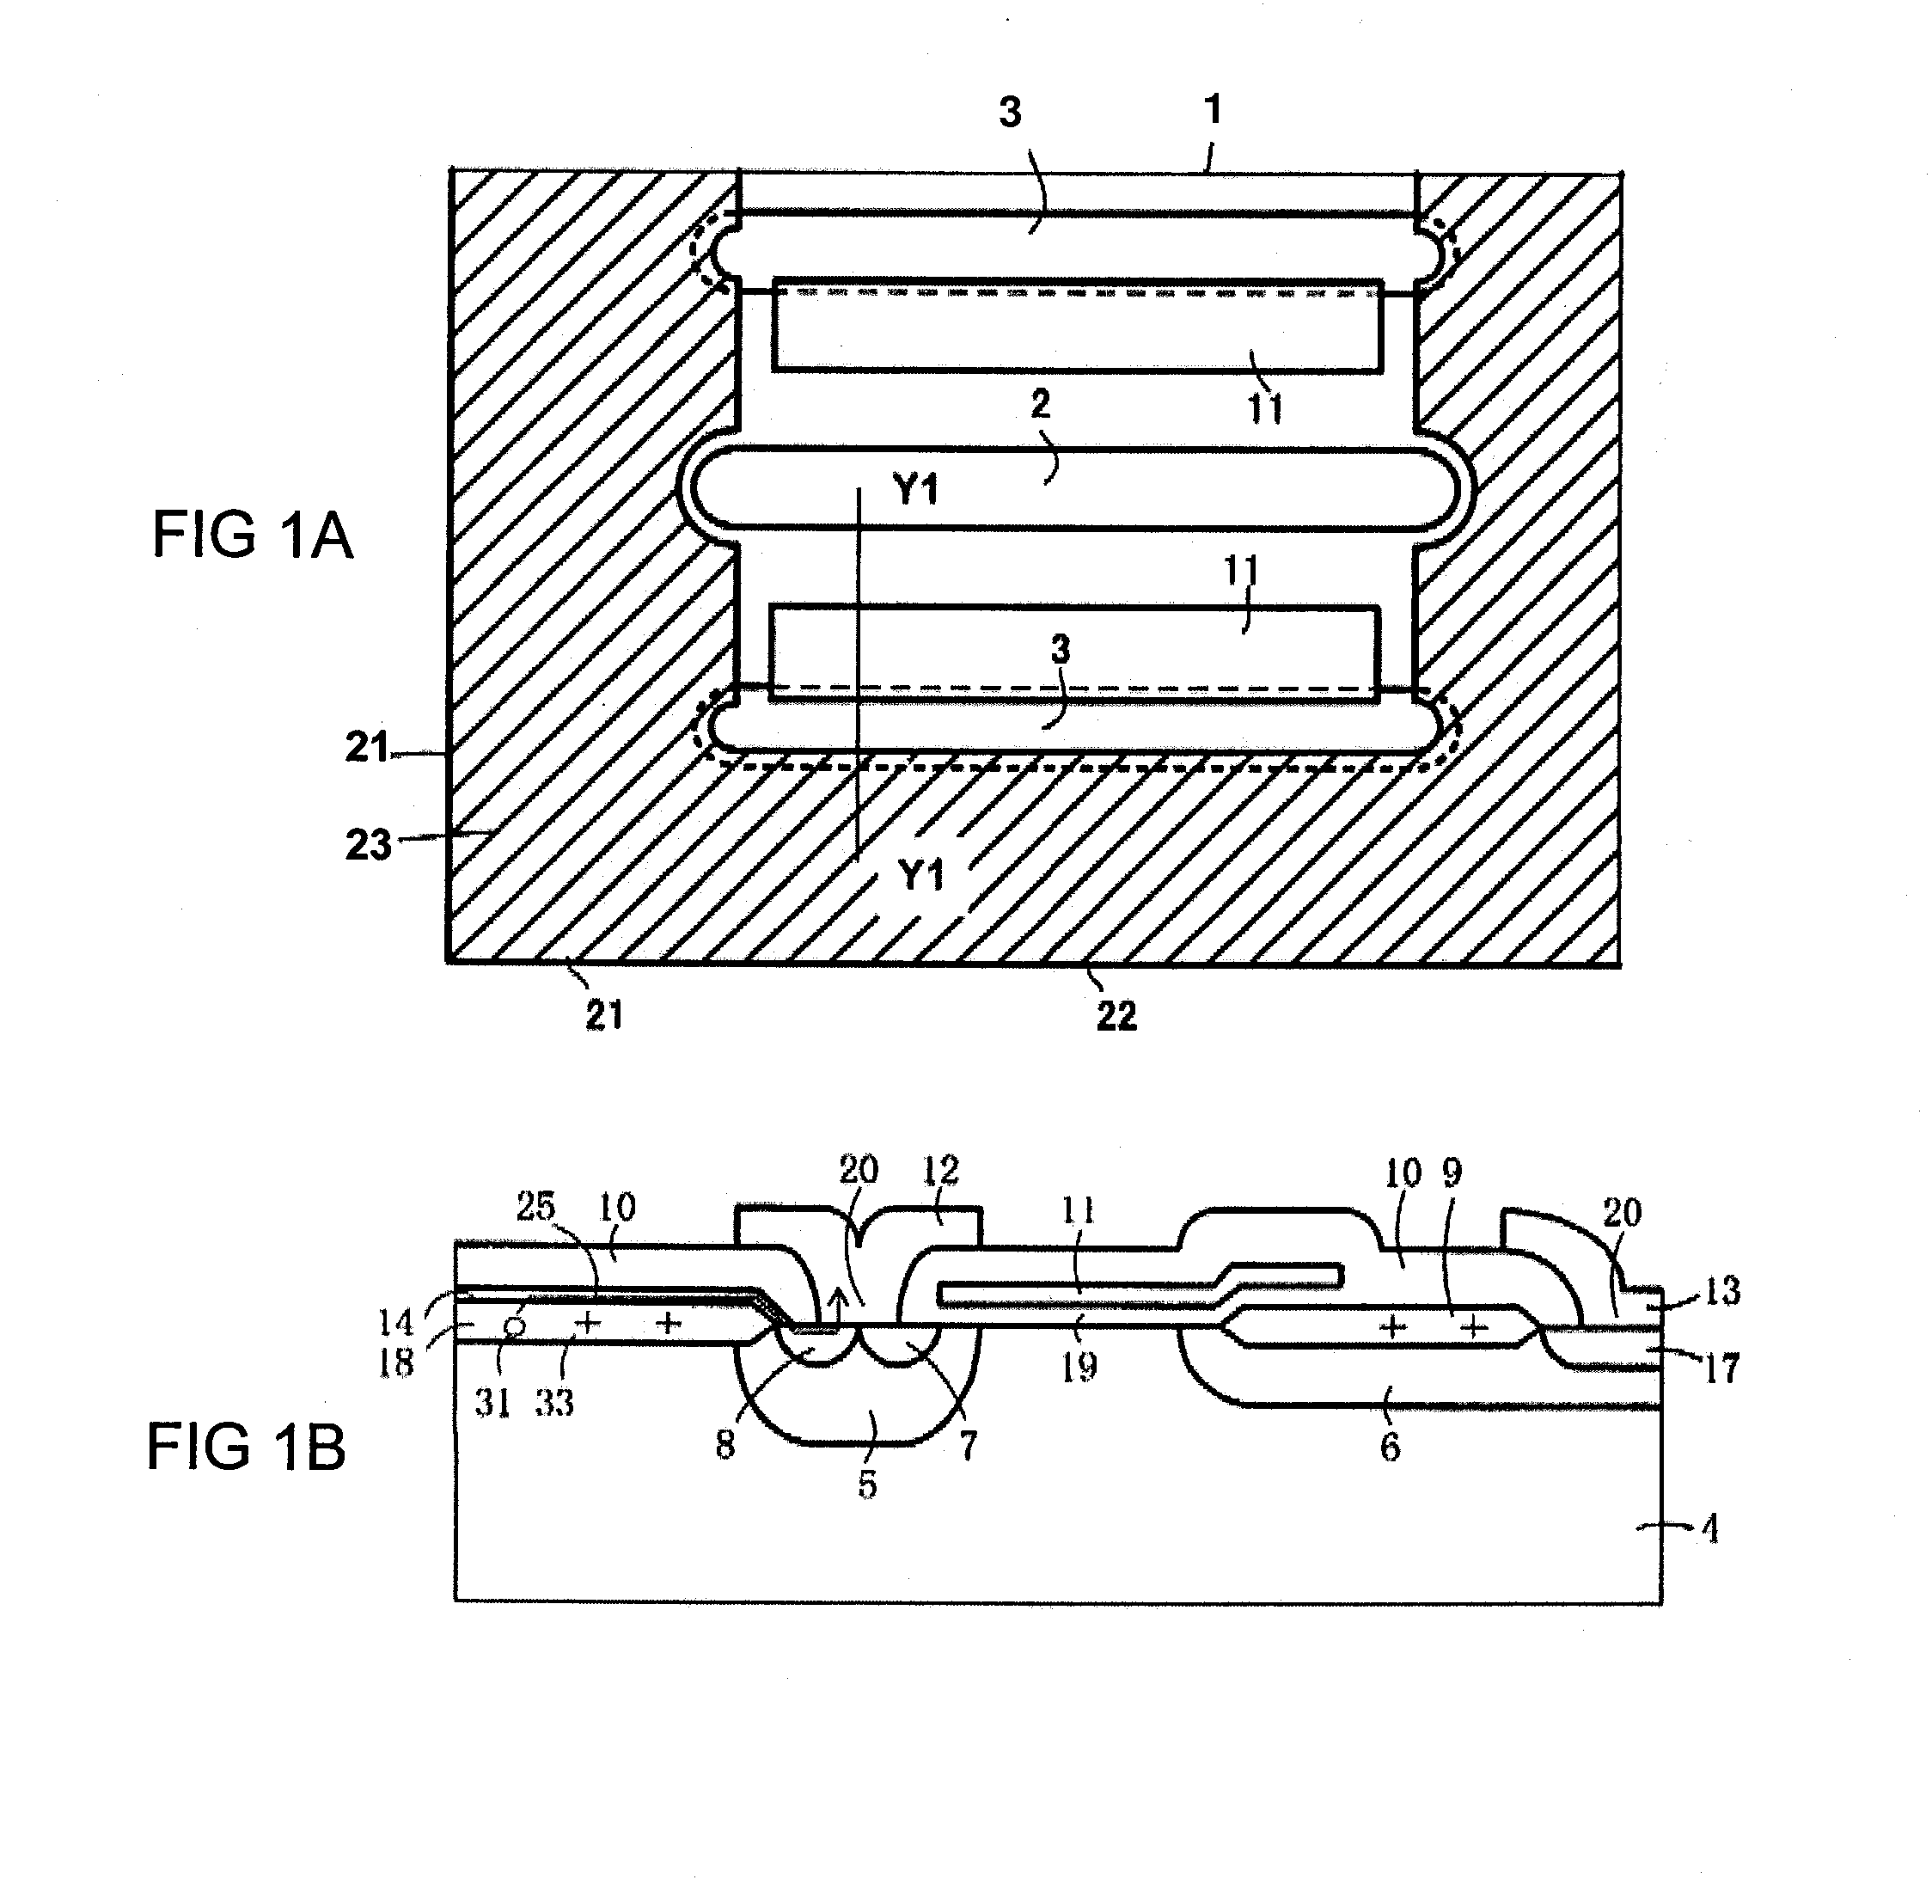 Mos type semiconductor device